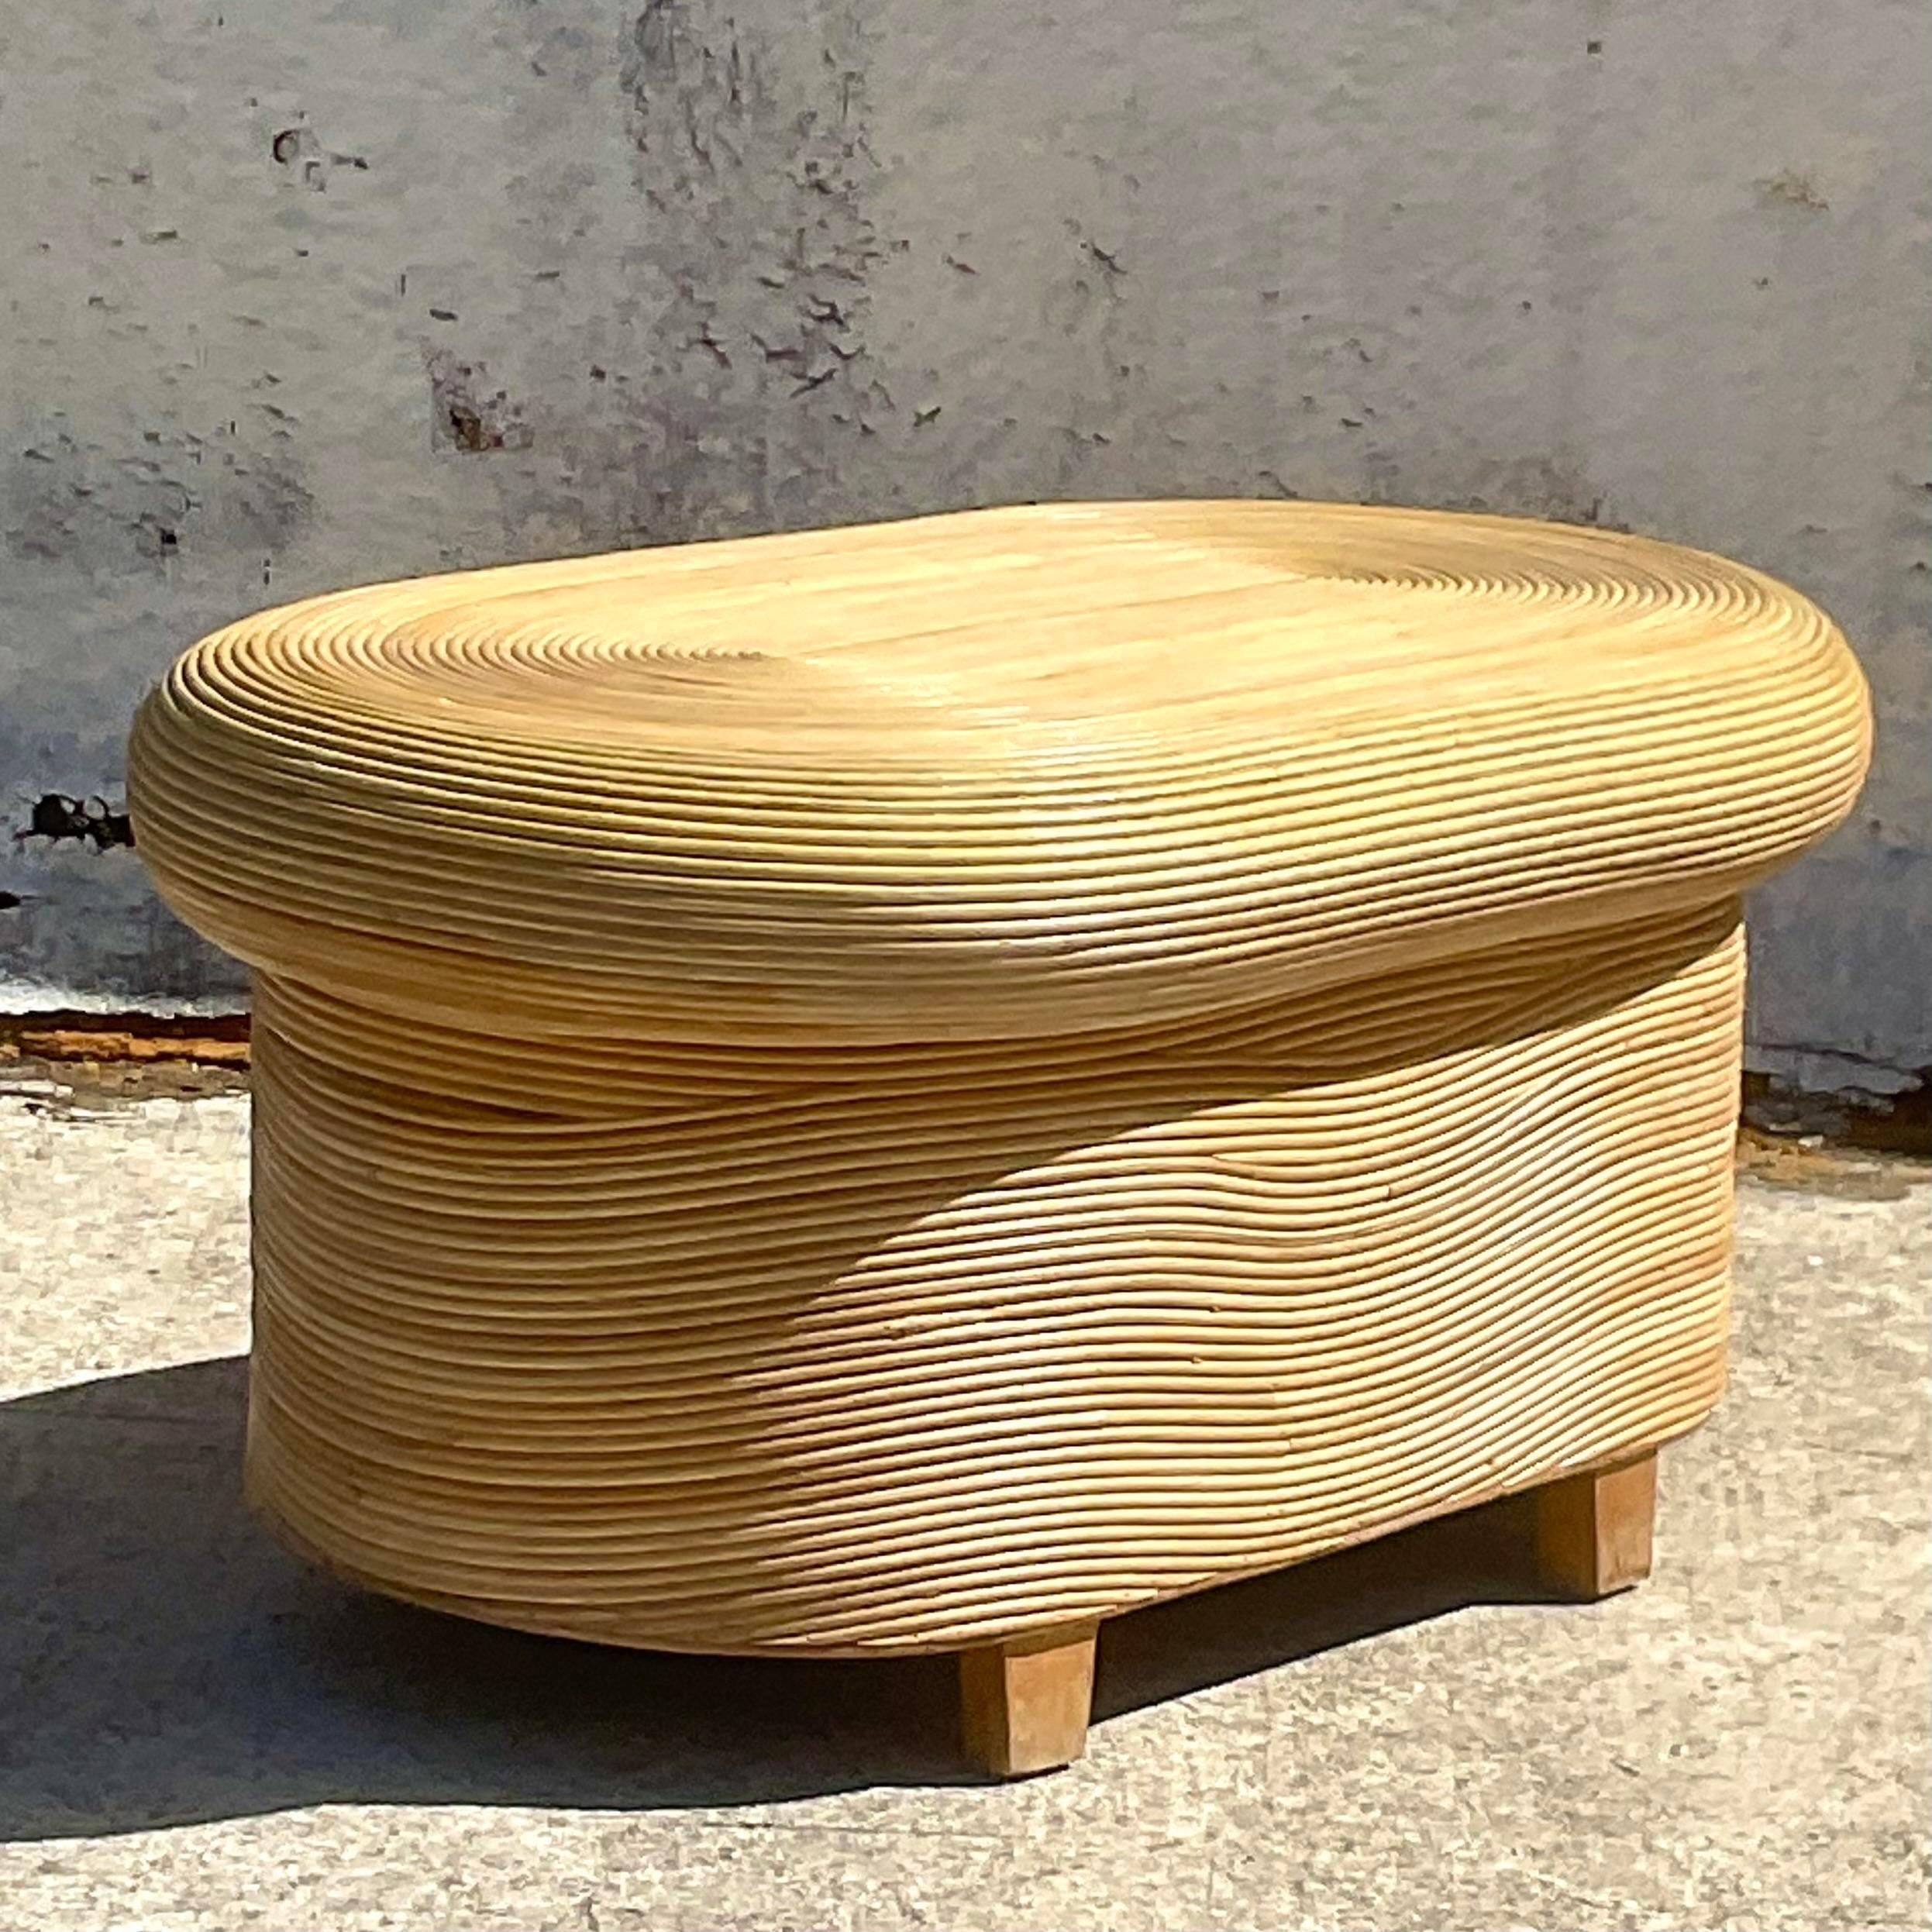 A fabulous vintage Coastal coffee table. A chic little mushroom shape in a pencil reed construction. Acquired from a Palm Beach estate.